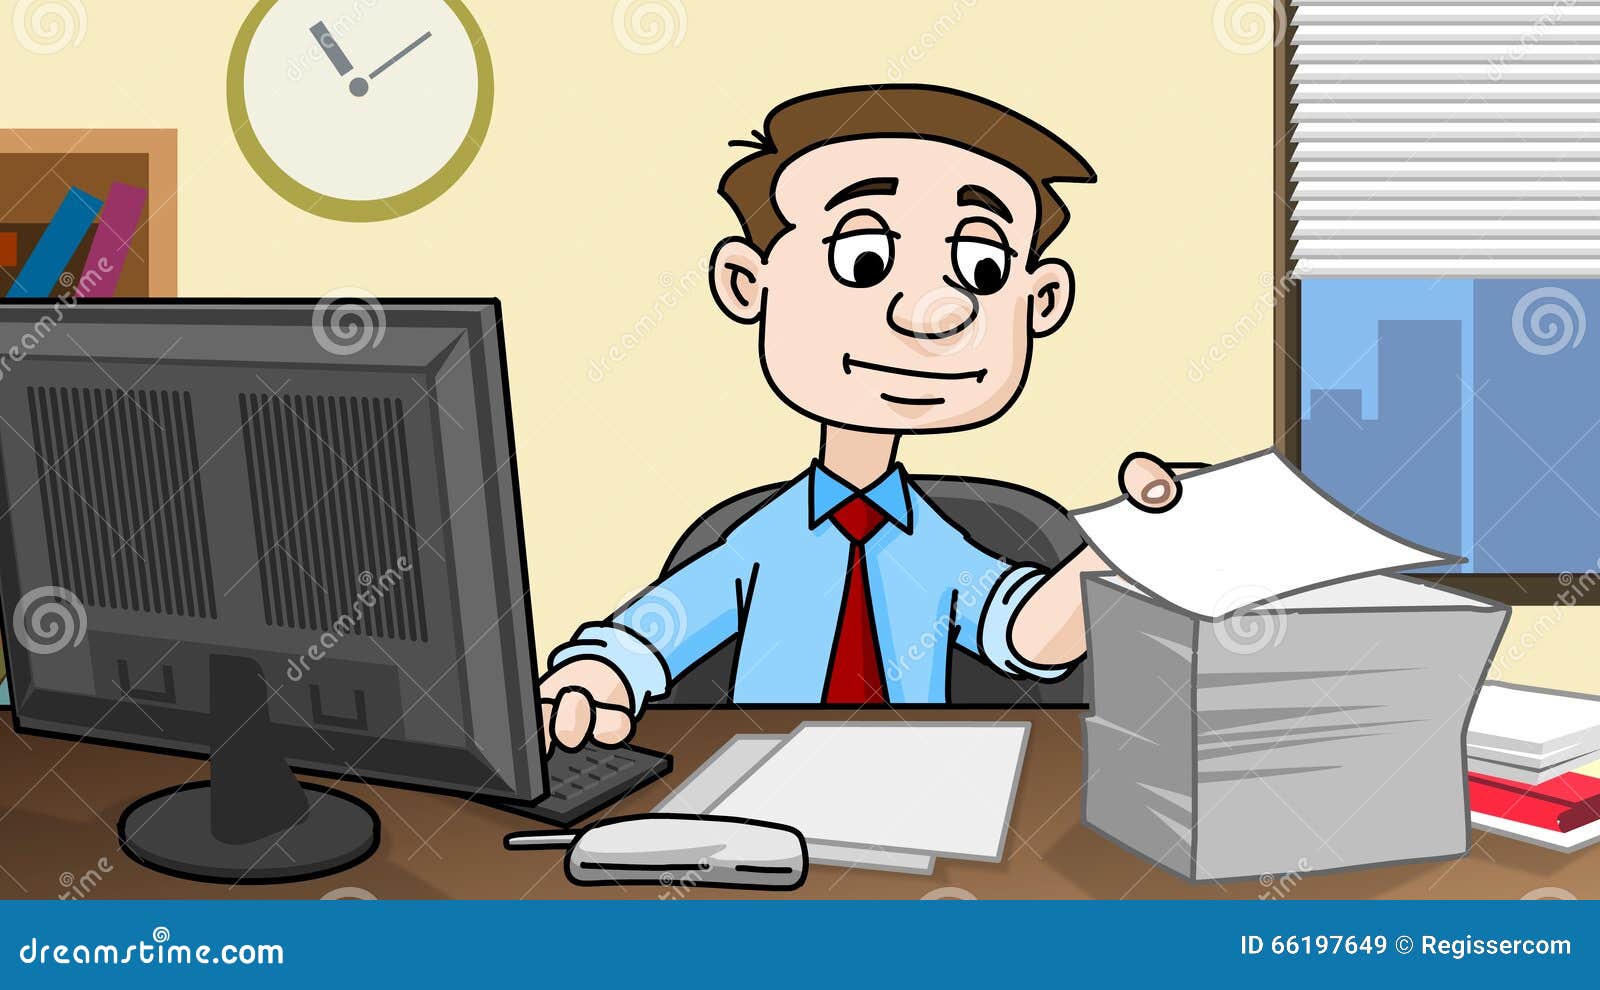 clipart man working at desk - photo #27